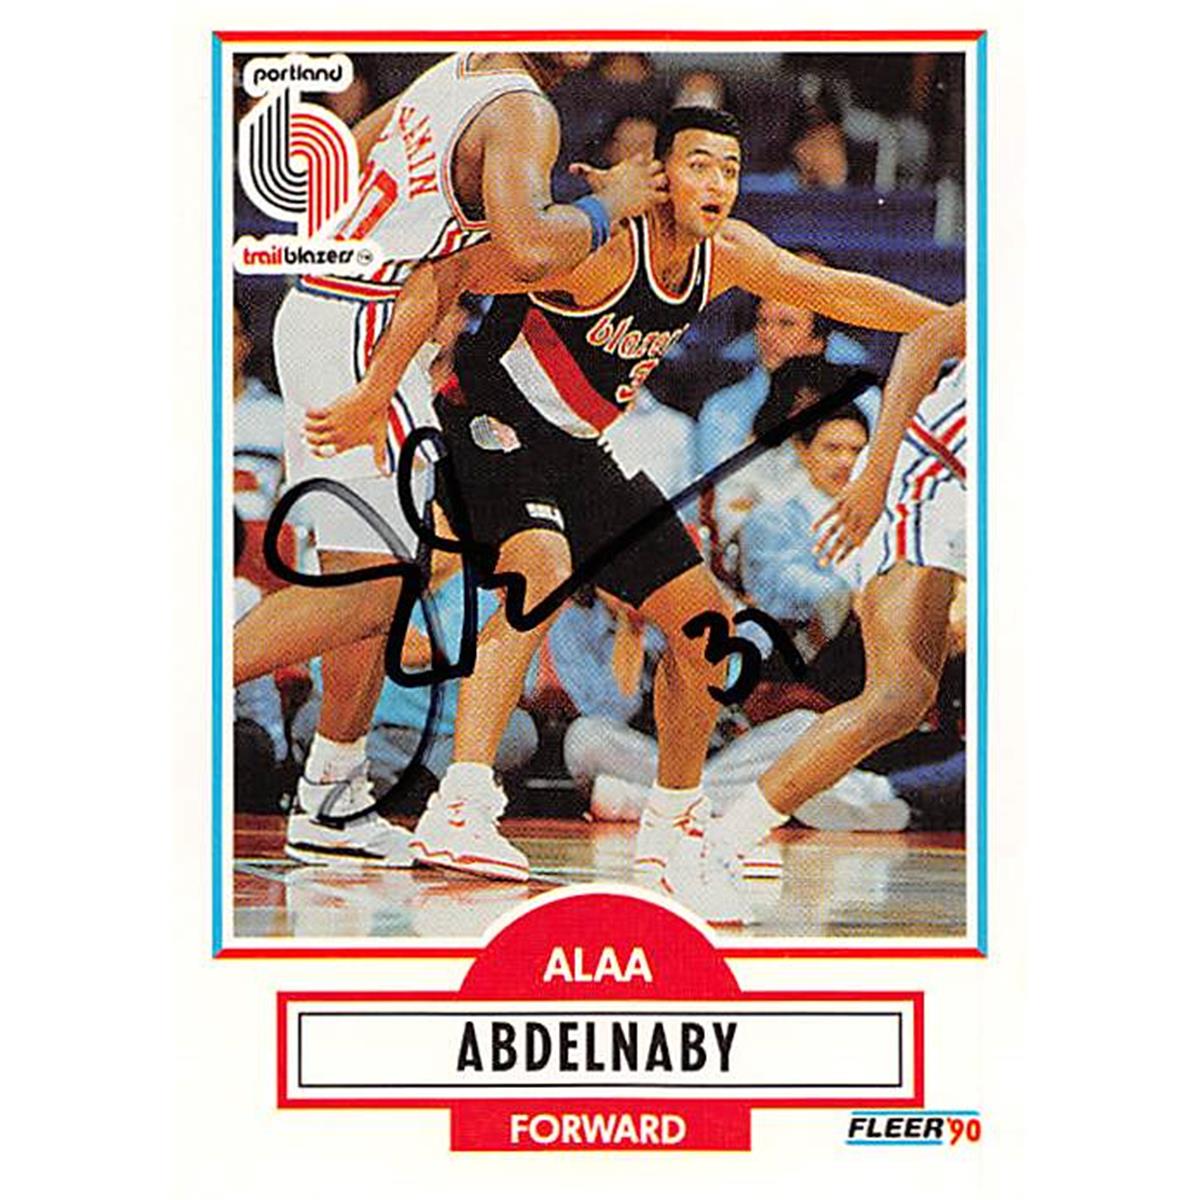 Picture of Autograph Warehouse 388502 Alaa Abdelnaby Autographed Basketball Card - Portland Trail Blazers 1991 Fleer Update No.U78